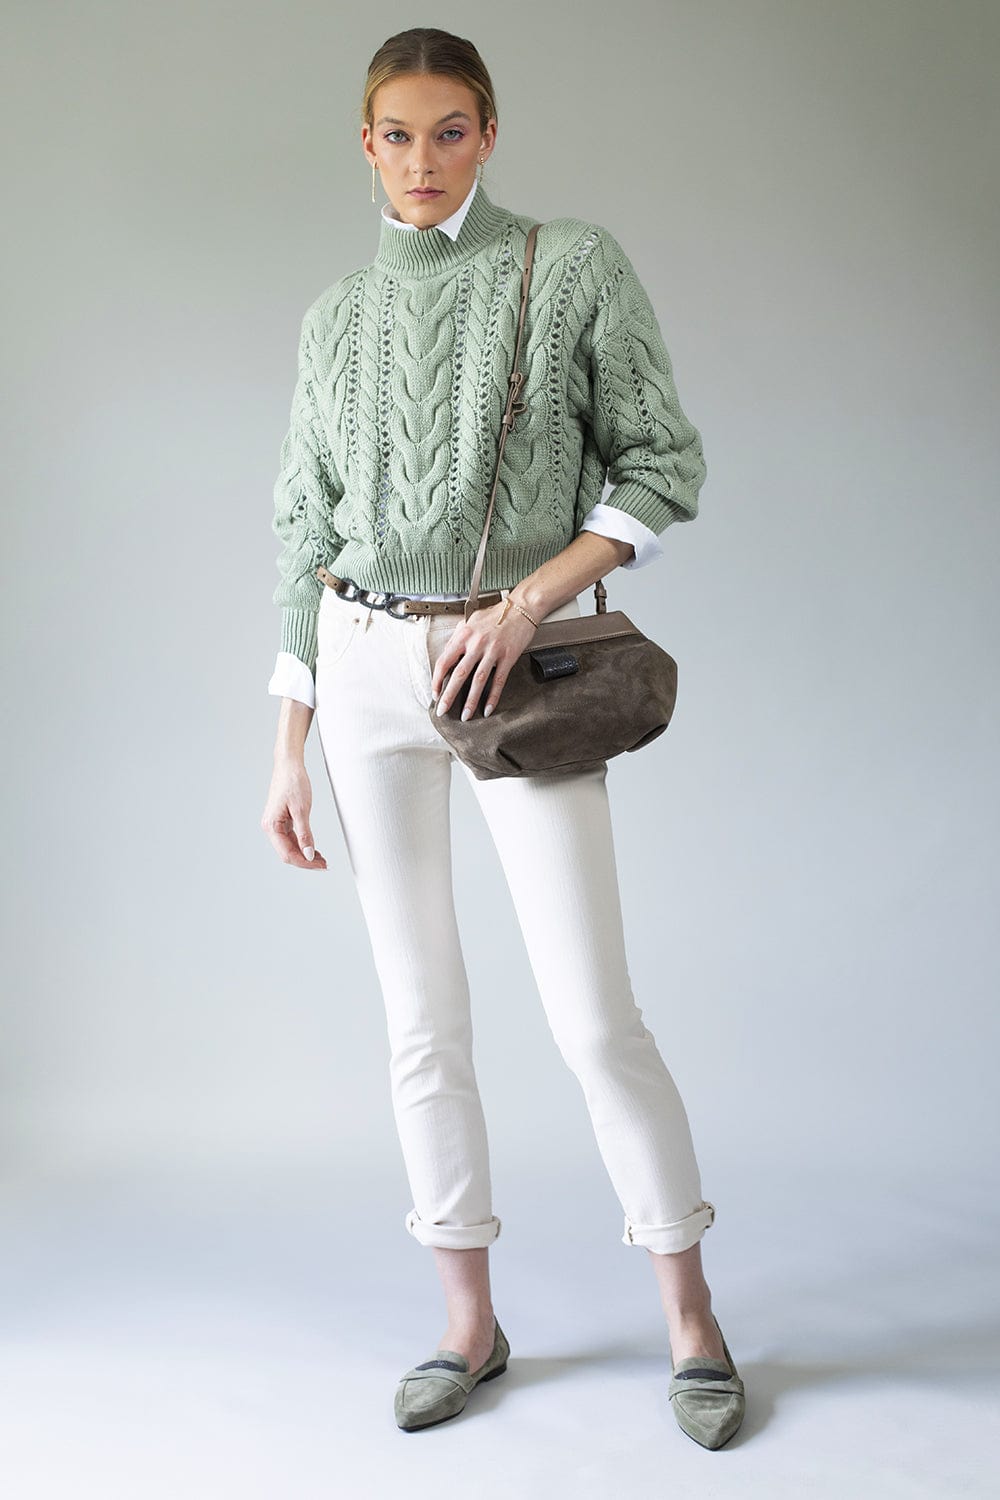 BRUNELLO CUCINELLI-Cropped Cable Knit Mock Neck-